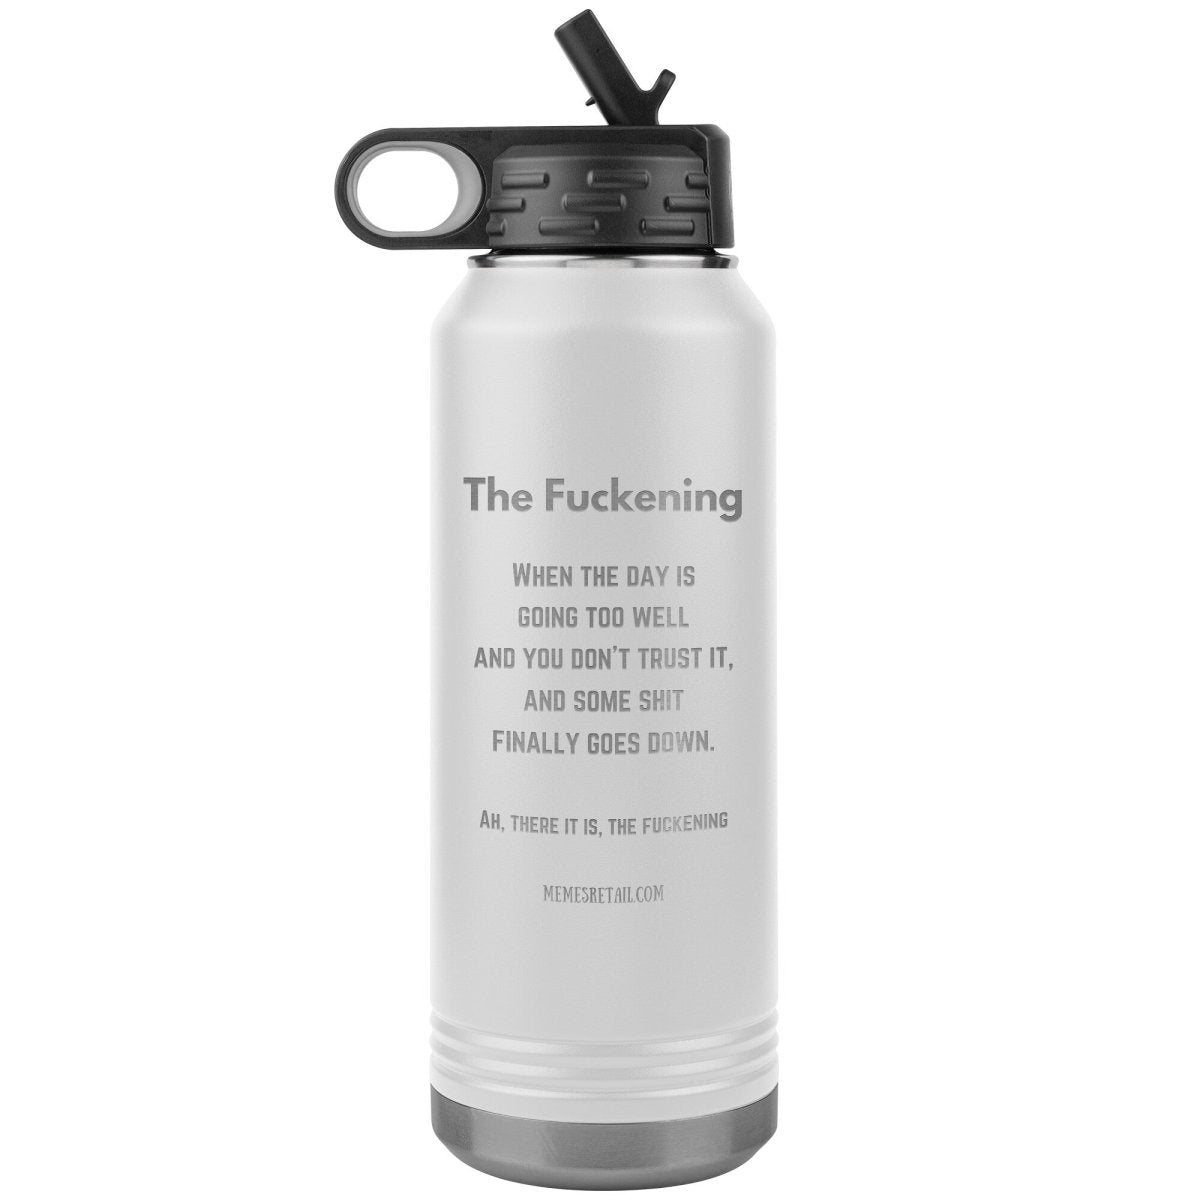 The Fuckening, When you don't trust the day. 32 oz Water Bottle, White - MemesRetail.com